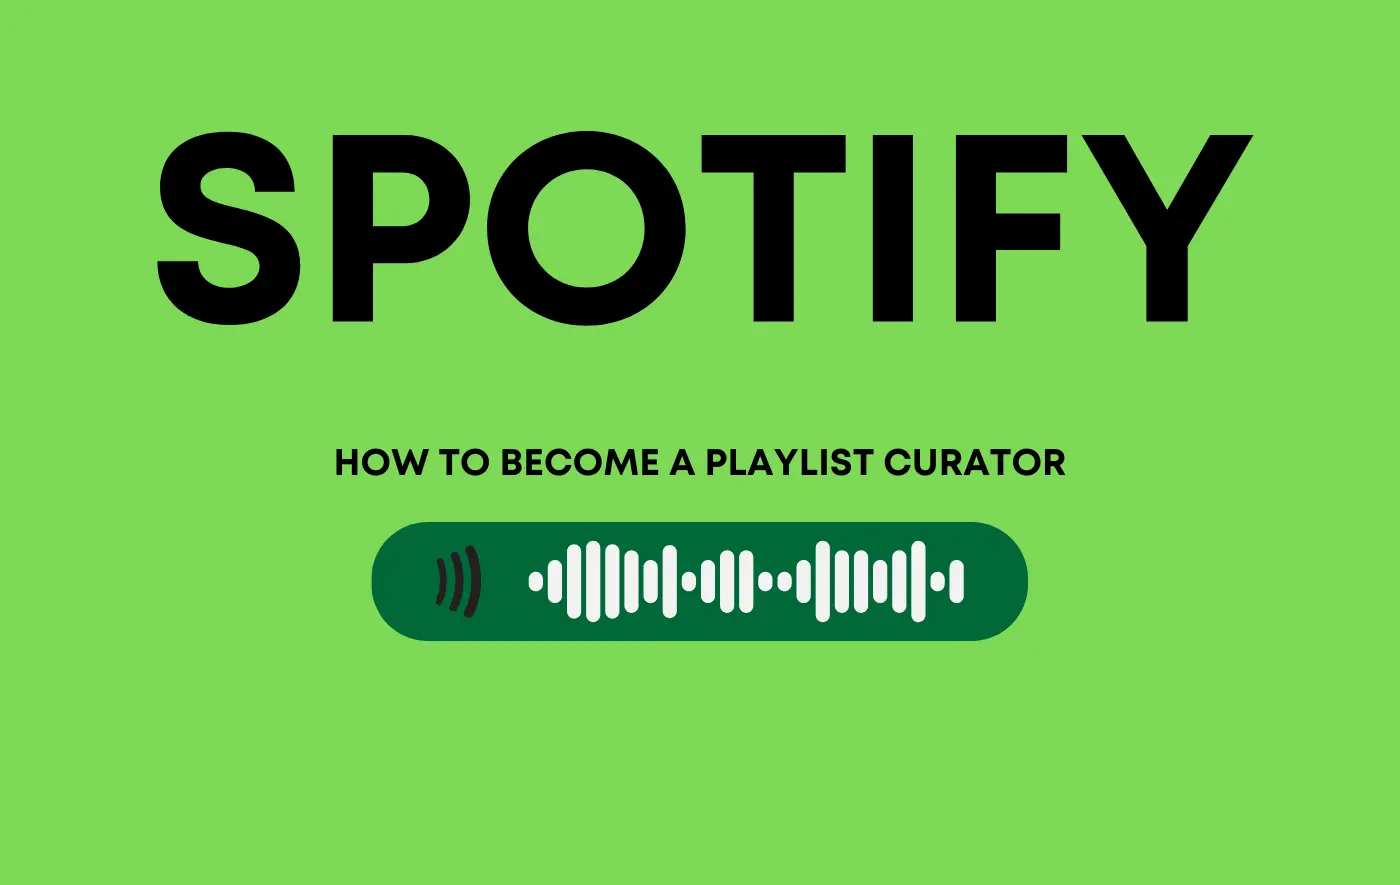 How to become a playlist curator